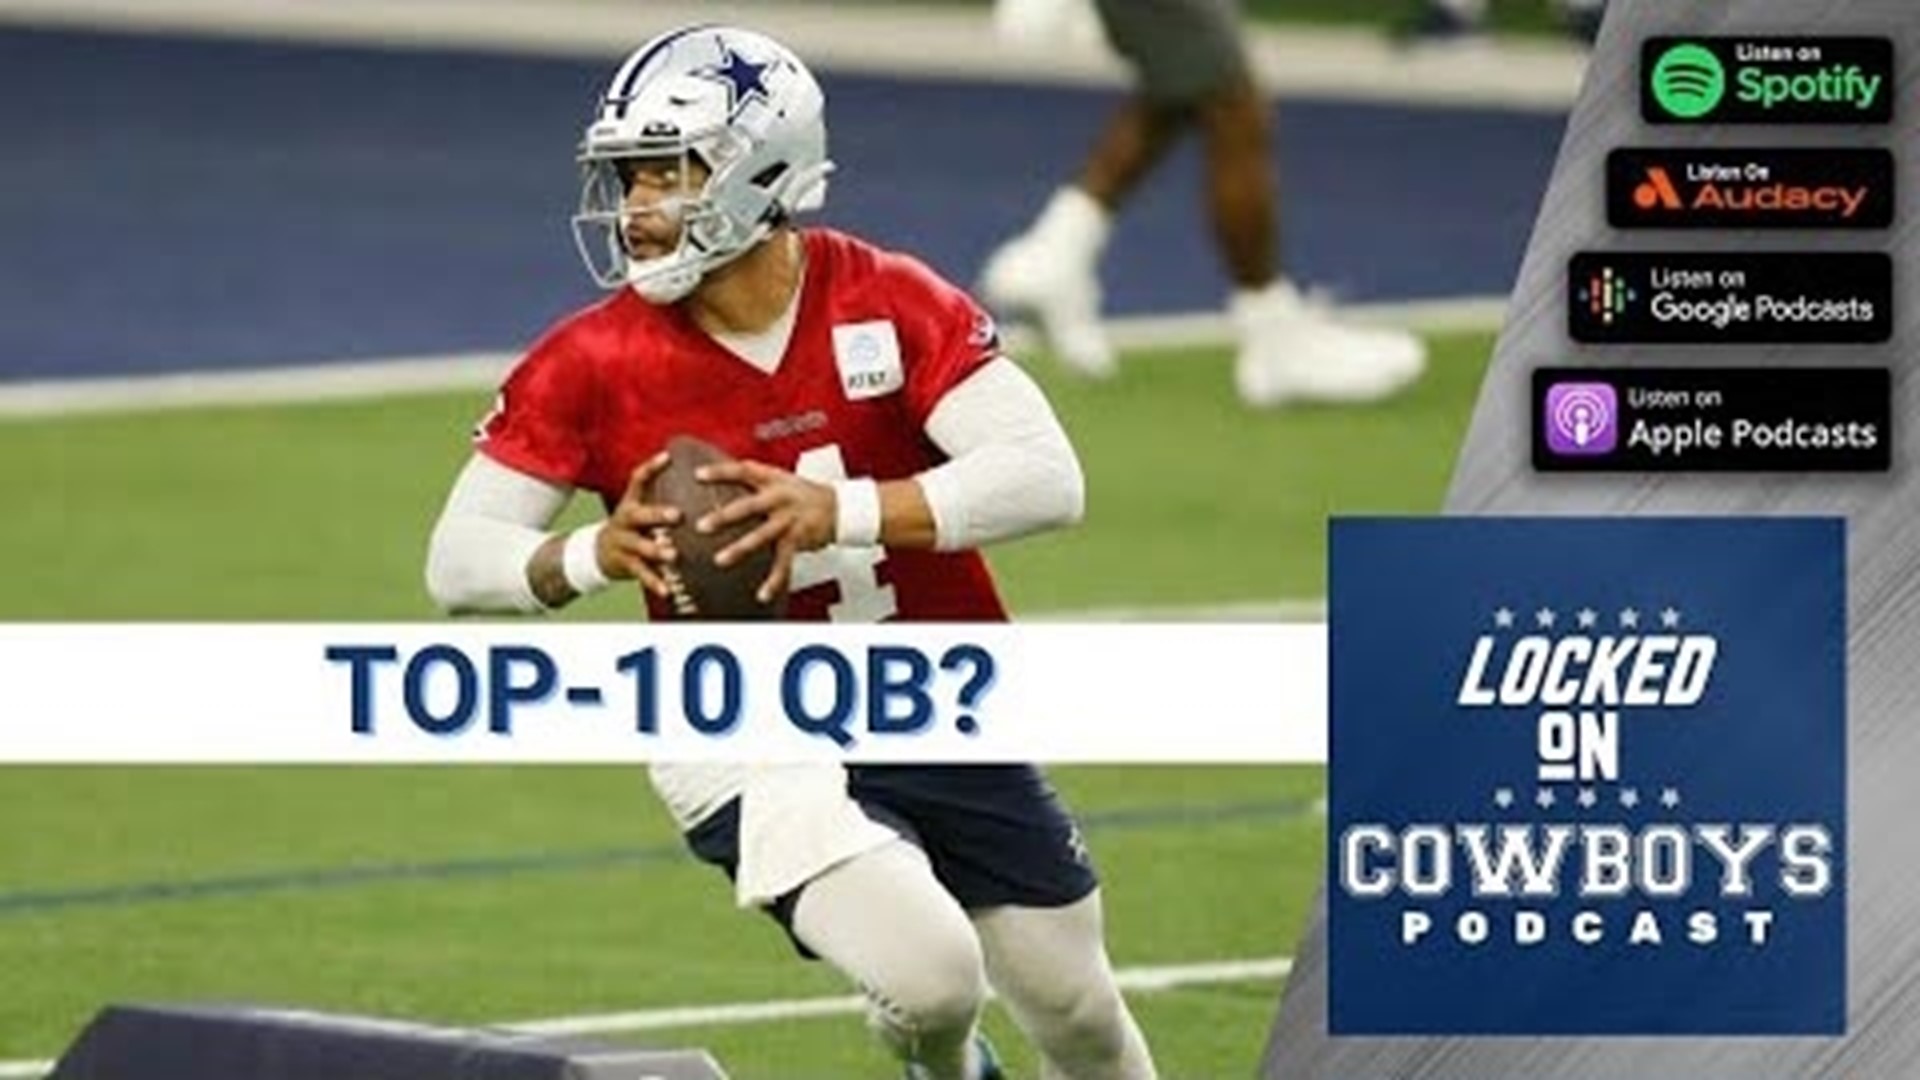 Marcus Mosher is joined by Kate Magdziuk of DraftKings Nation and Locked On Dynasty Football to discuss if Dak Prescott is a top-10 quarterback heading into 2022.